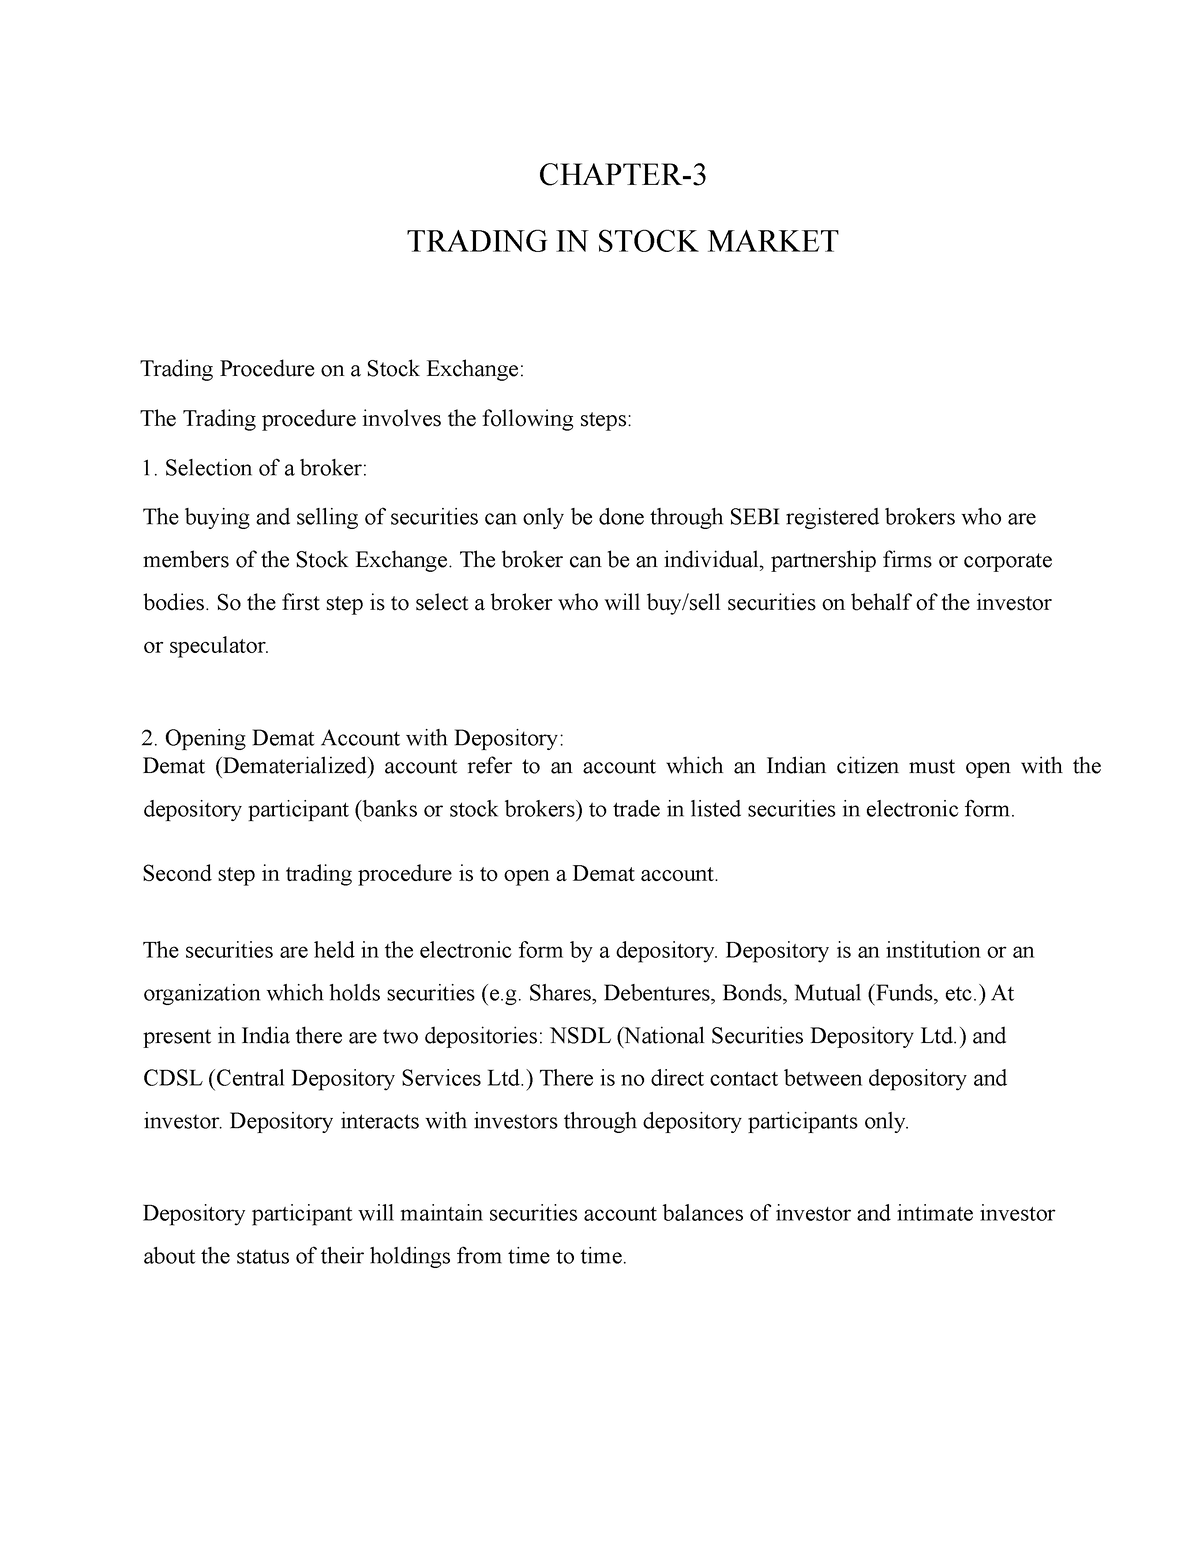 essay about stock trading